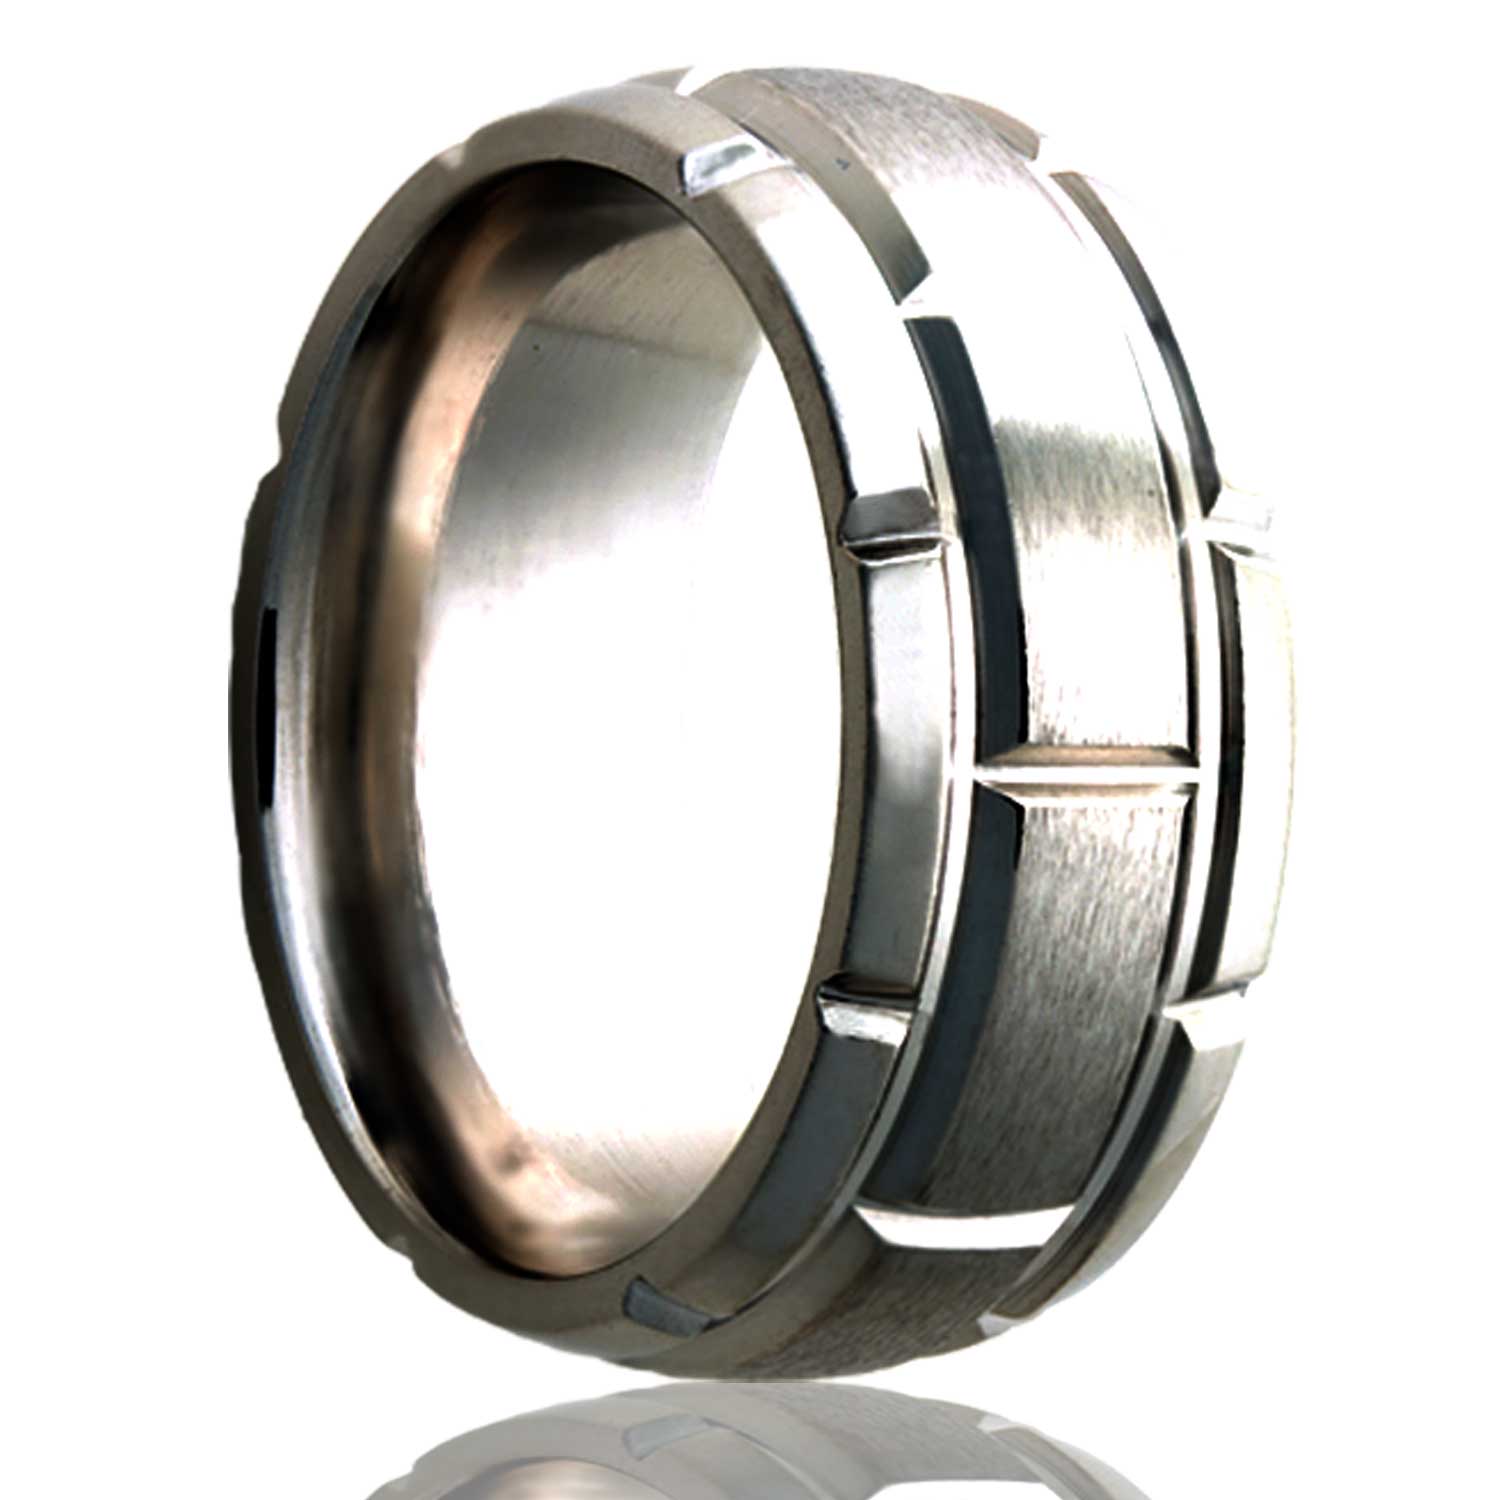 A brick pattern domed satin finish cobalt wedding band displayed on a neutral white background.